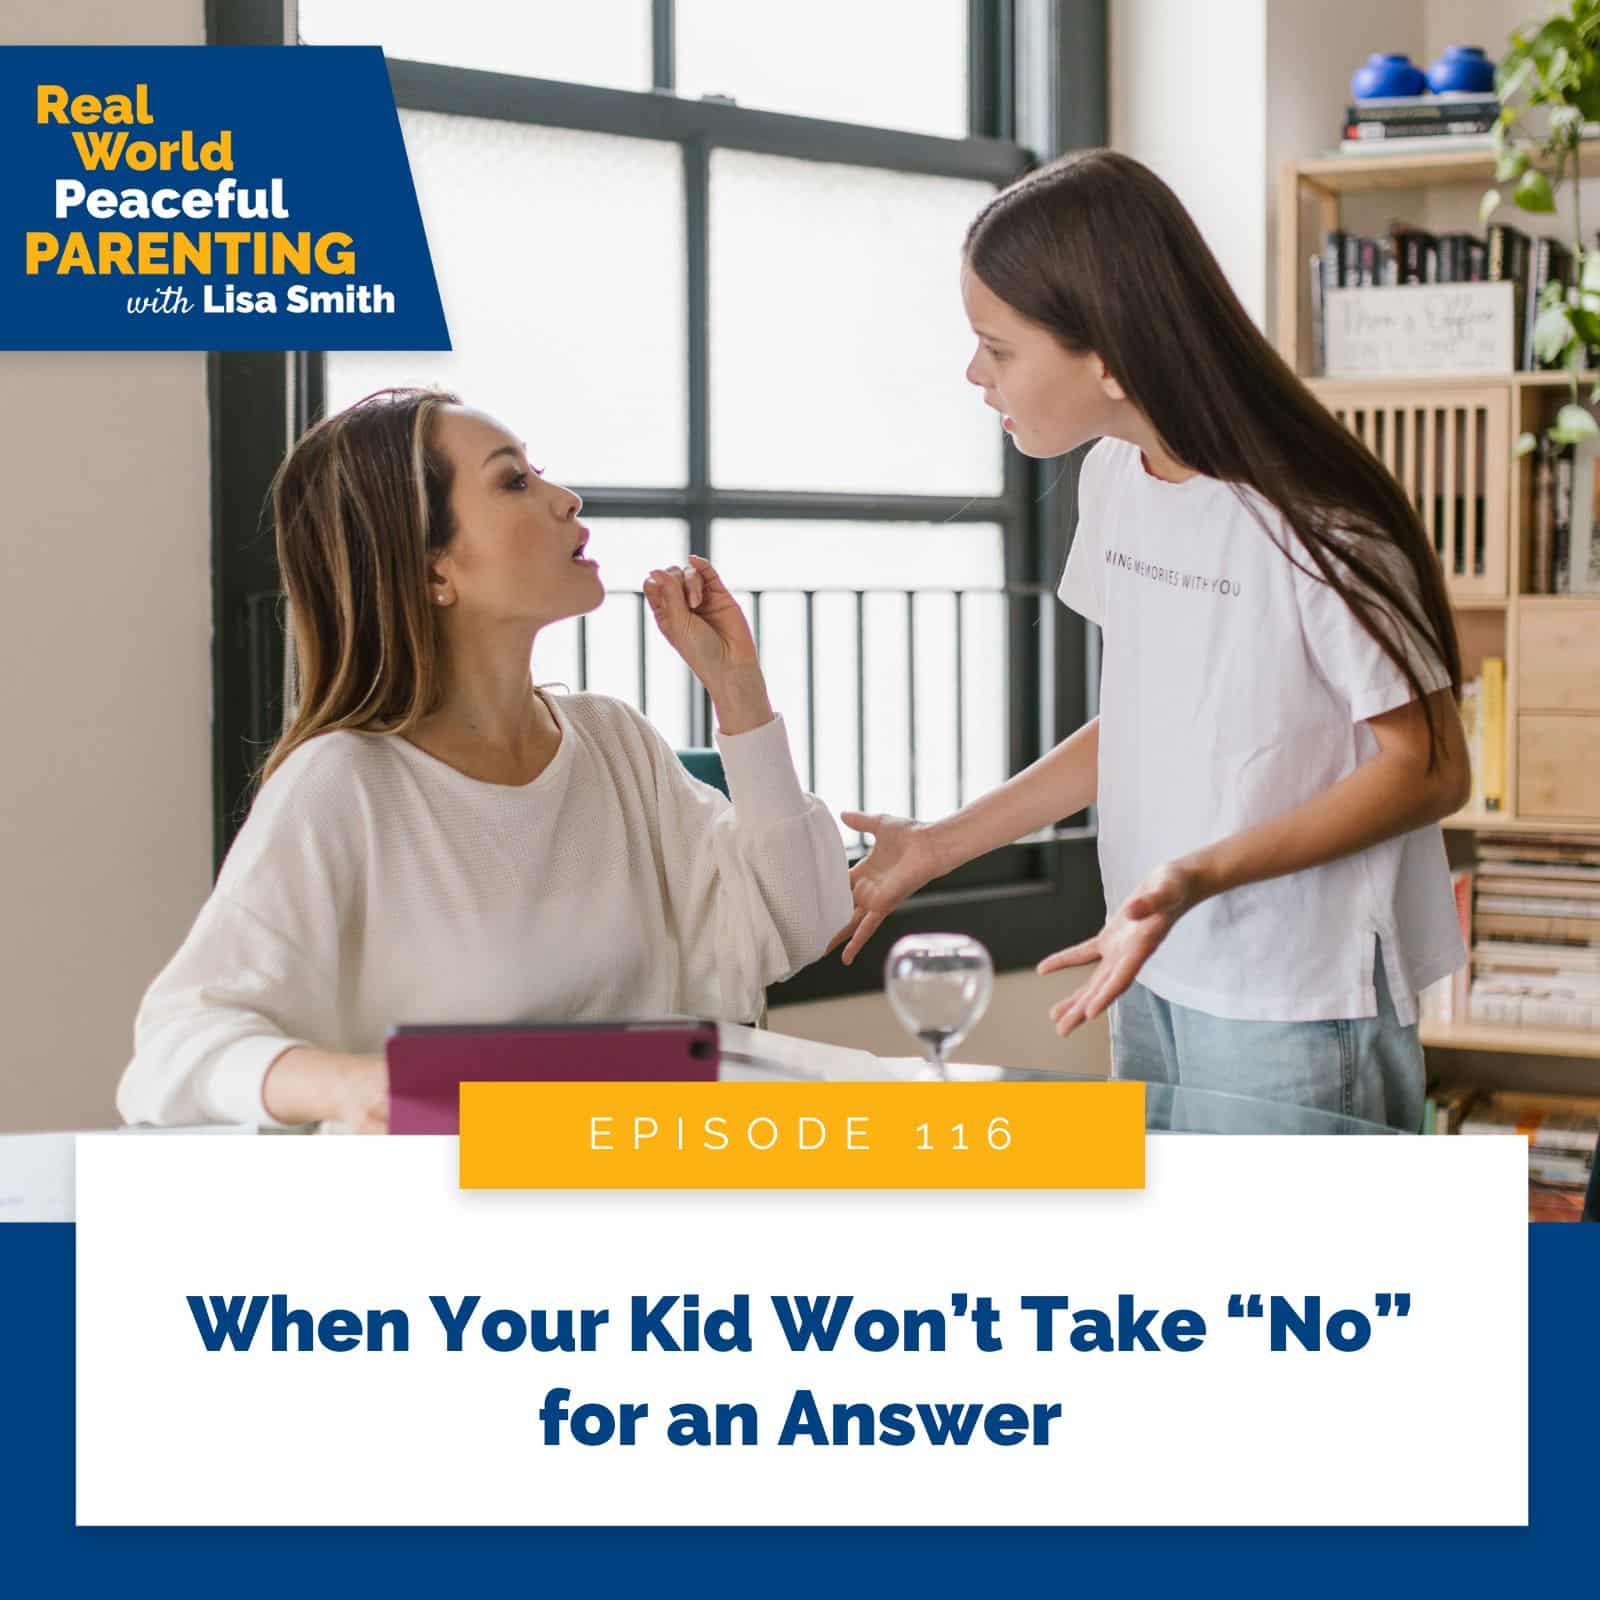 Real World Peaceful Parenting Lisa Smith | When Your Kid Won’t Take “No” for an Answer